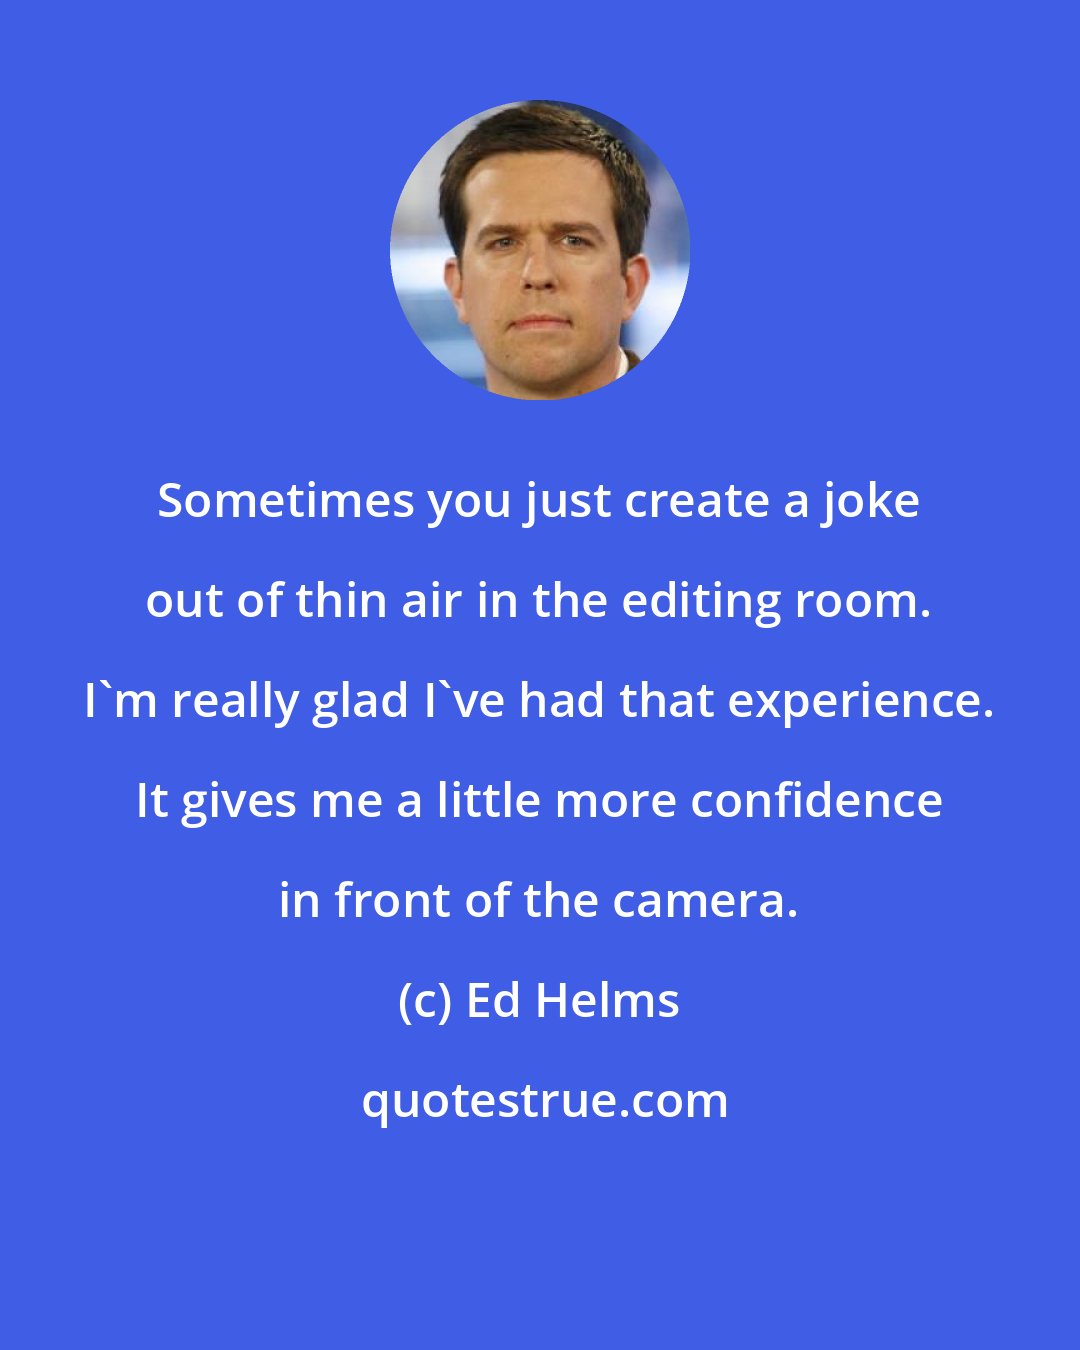 Ed Helms: Sometimes you just create a joke out of thin air in the editing room. I'm really glad I've had that experience. It gives me a little more confidence in front of the camera.